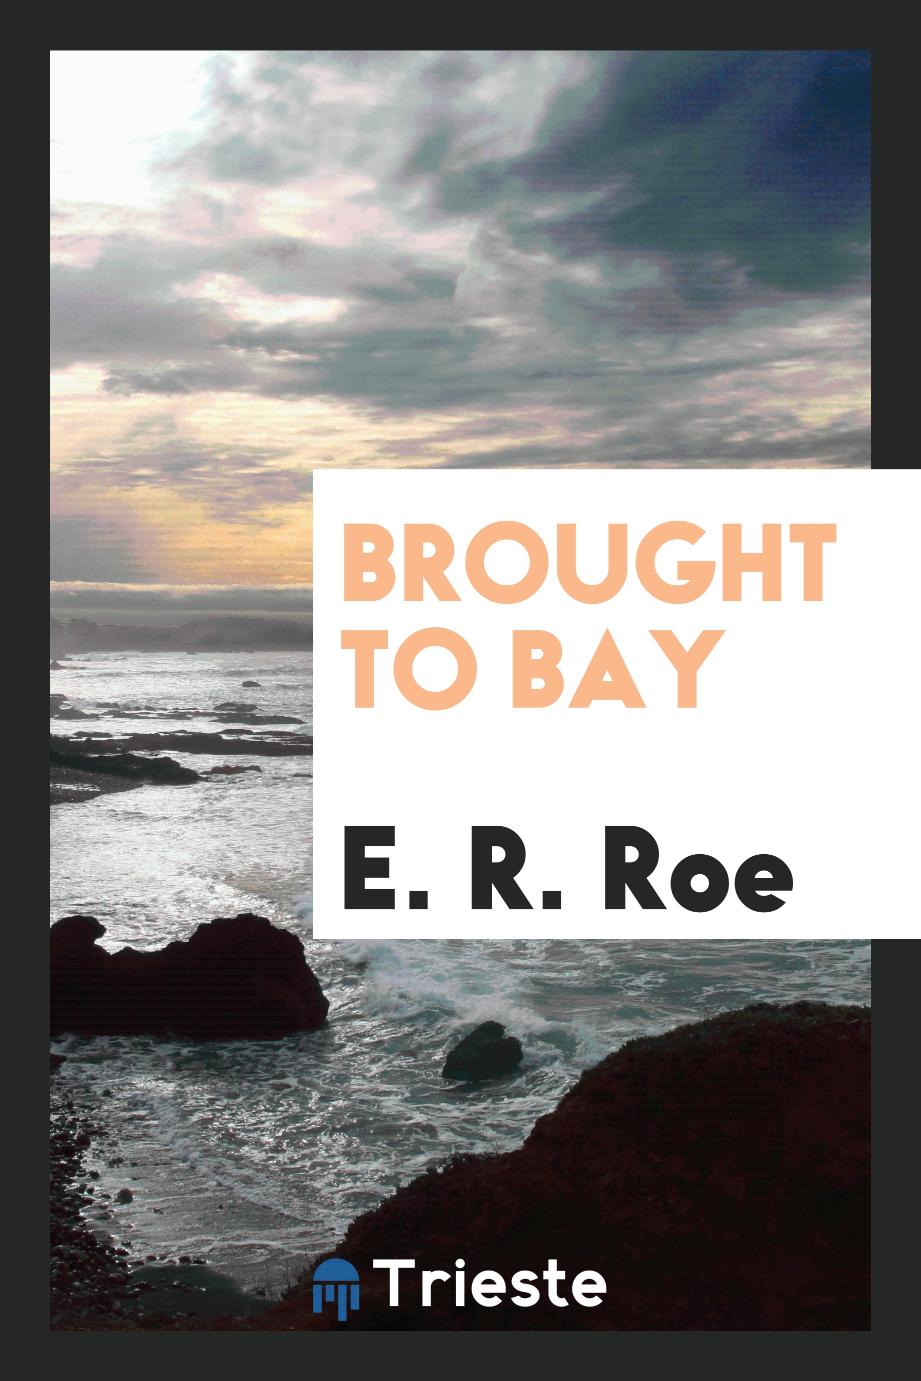 E. R. Roe - Brought to bay